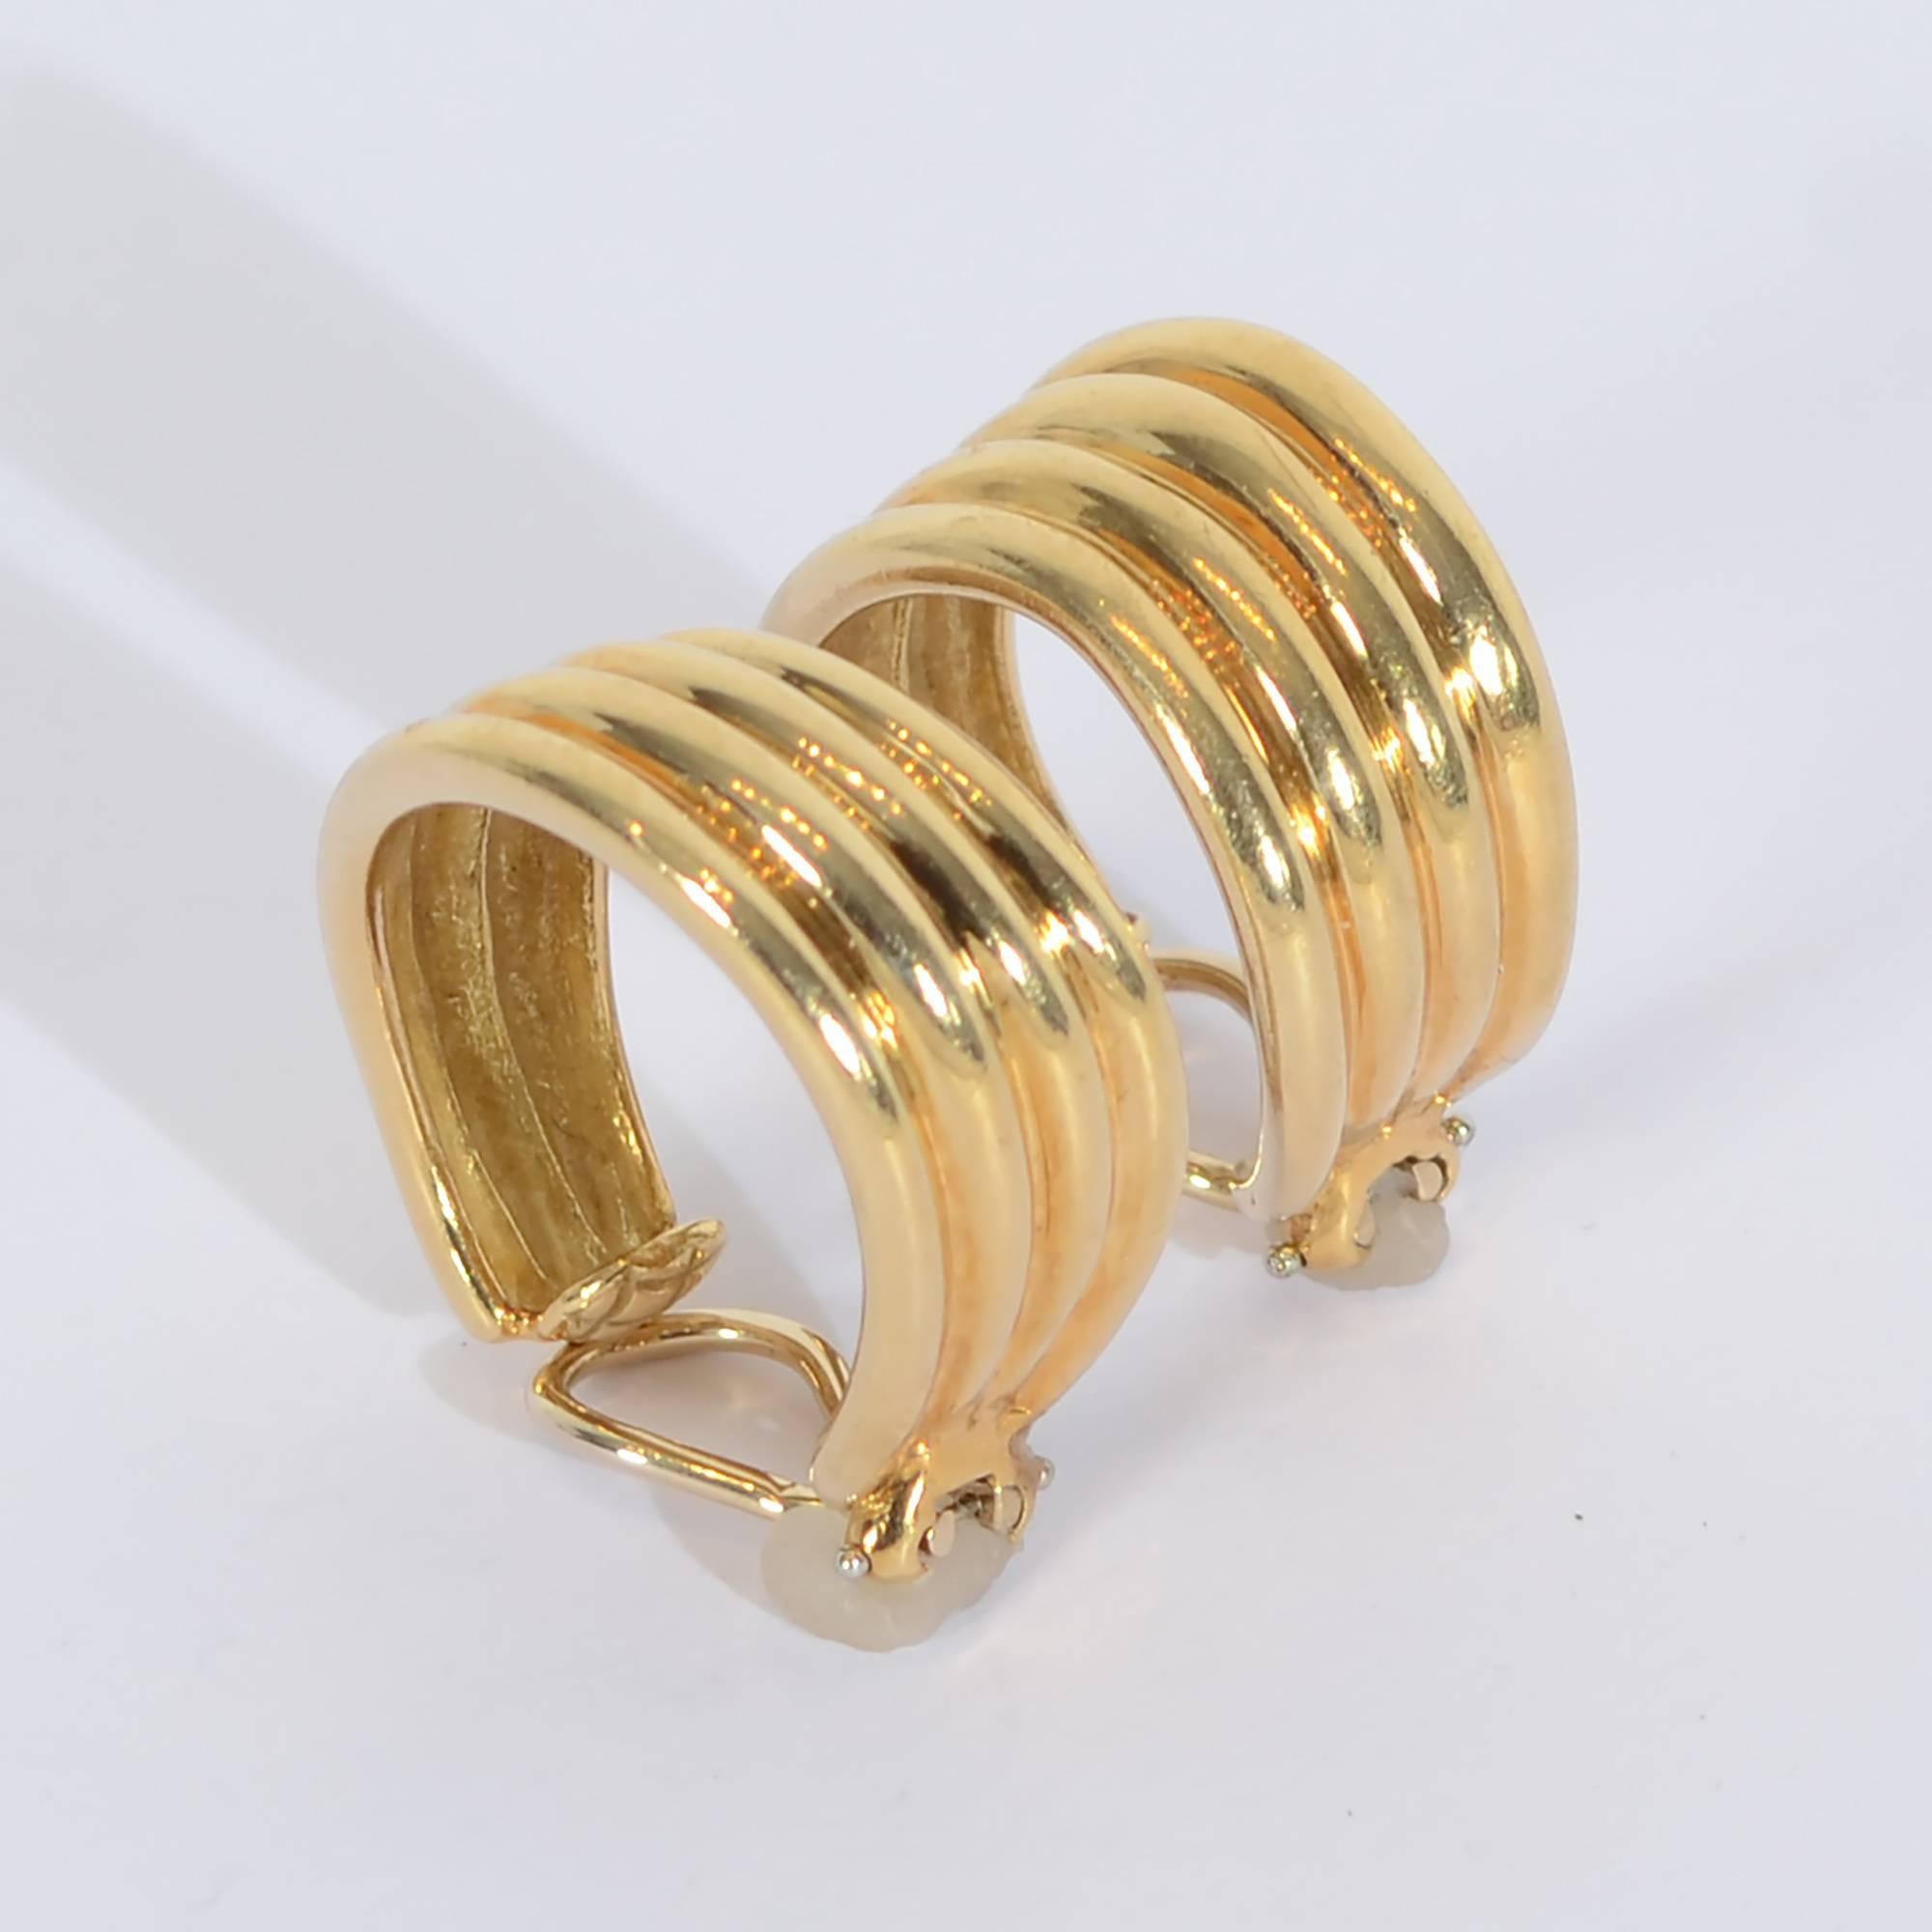 Tiffany Ribbed Gold Hoop Earrings In Excellent Condition For Sale In Darnestown, MD